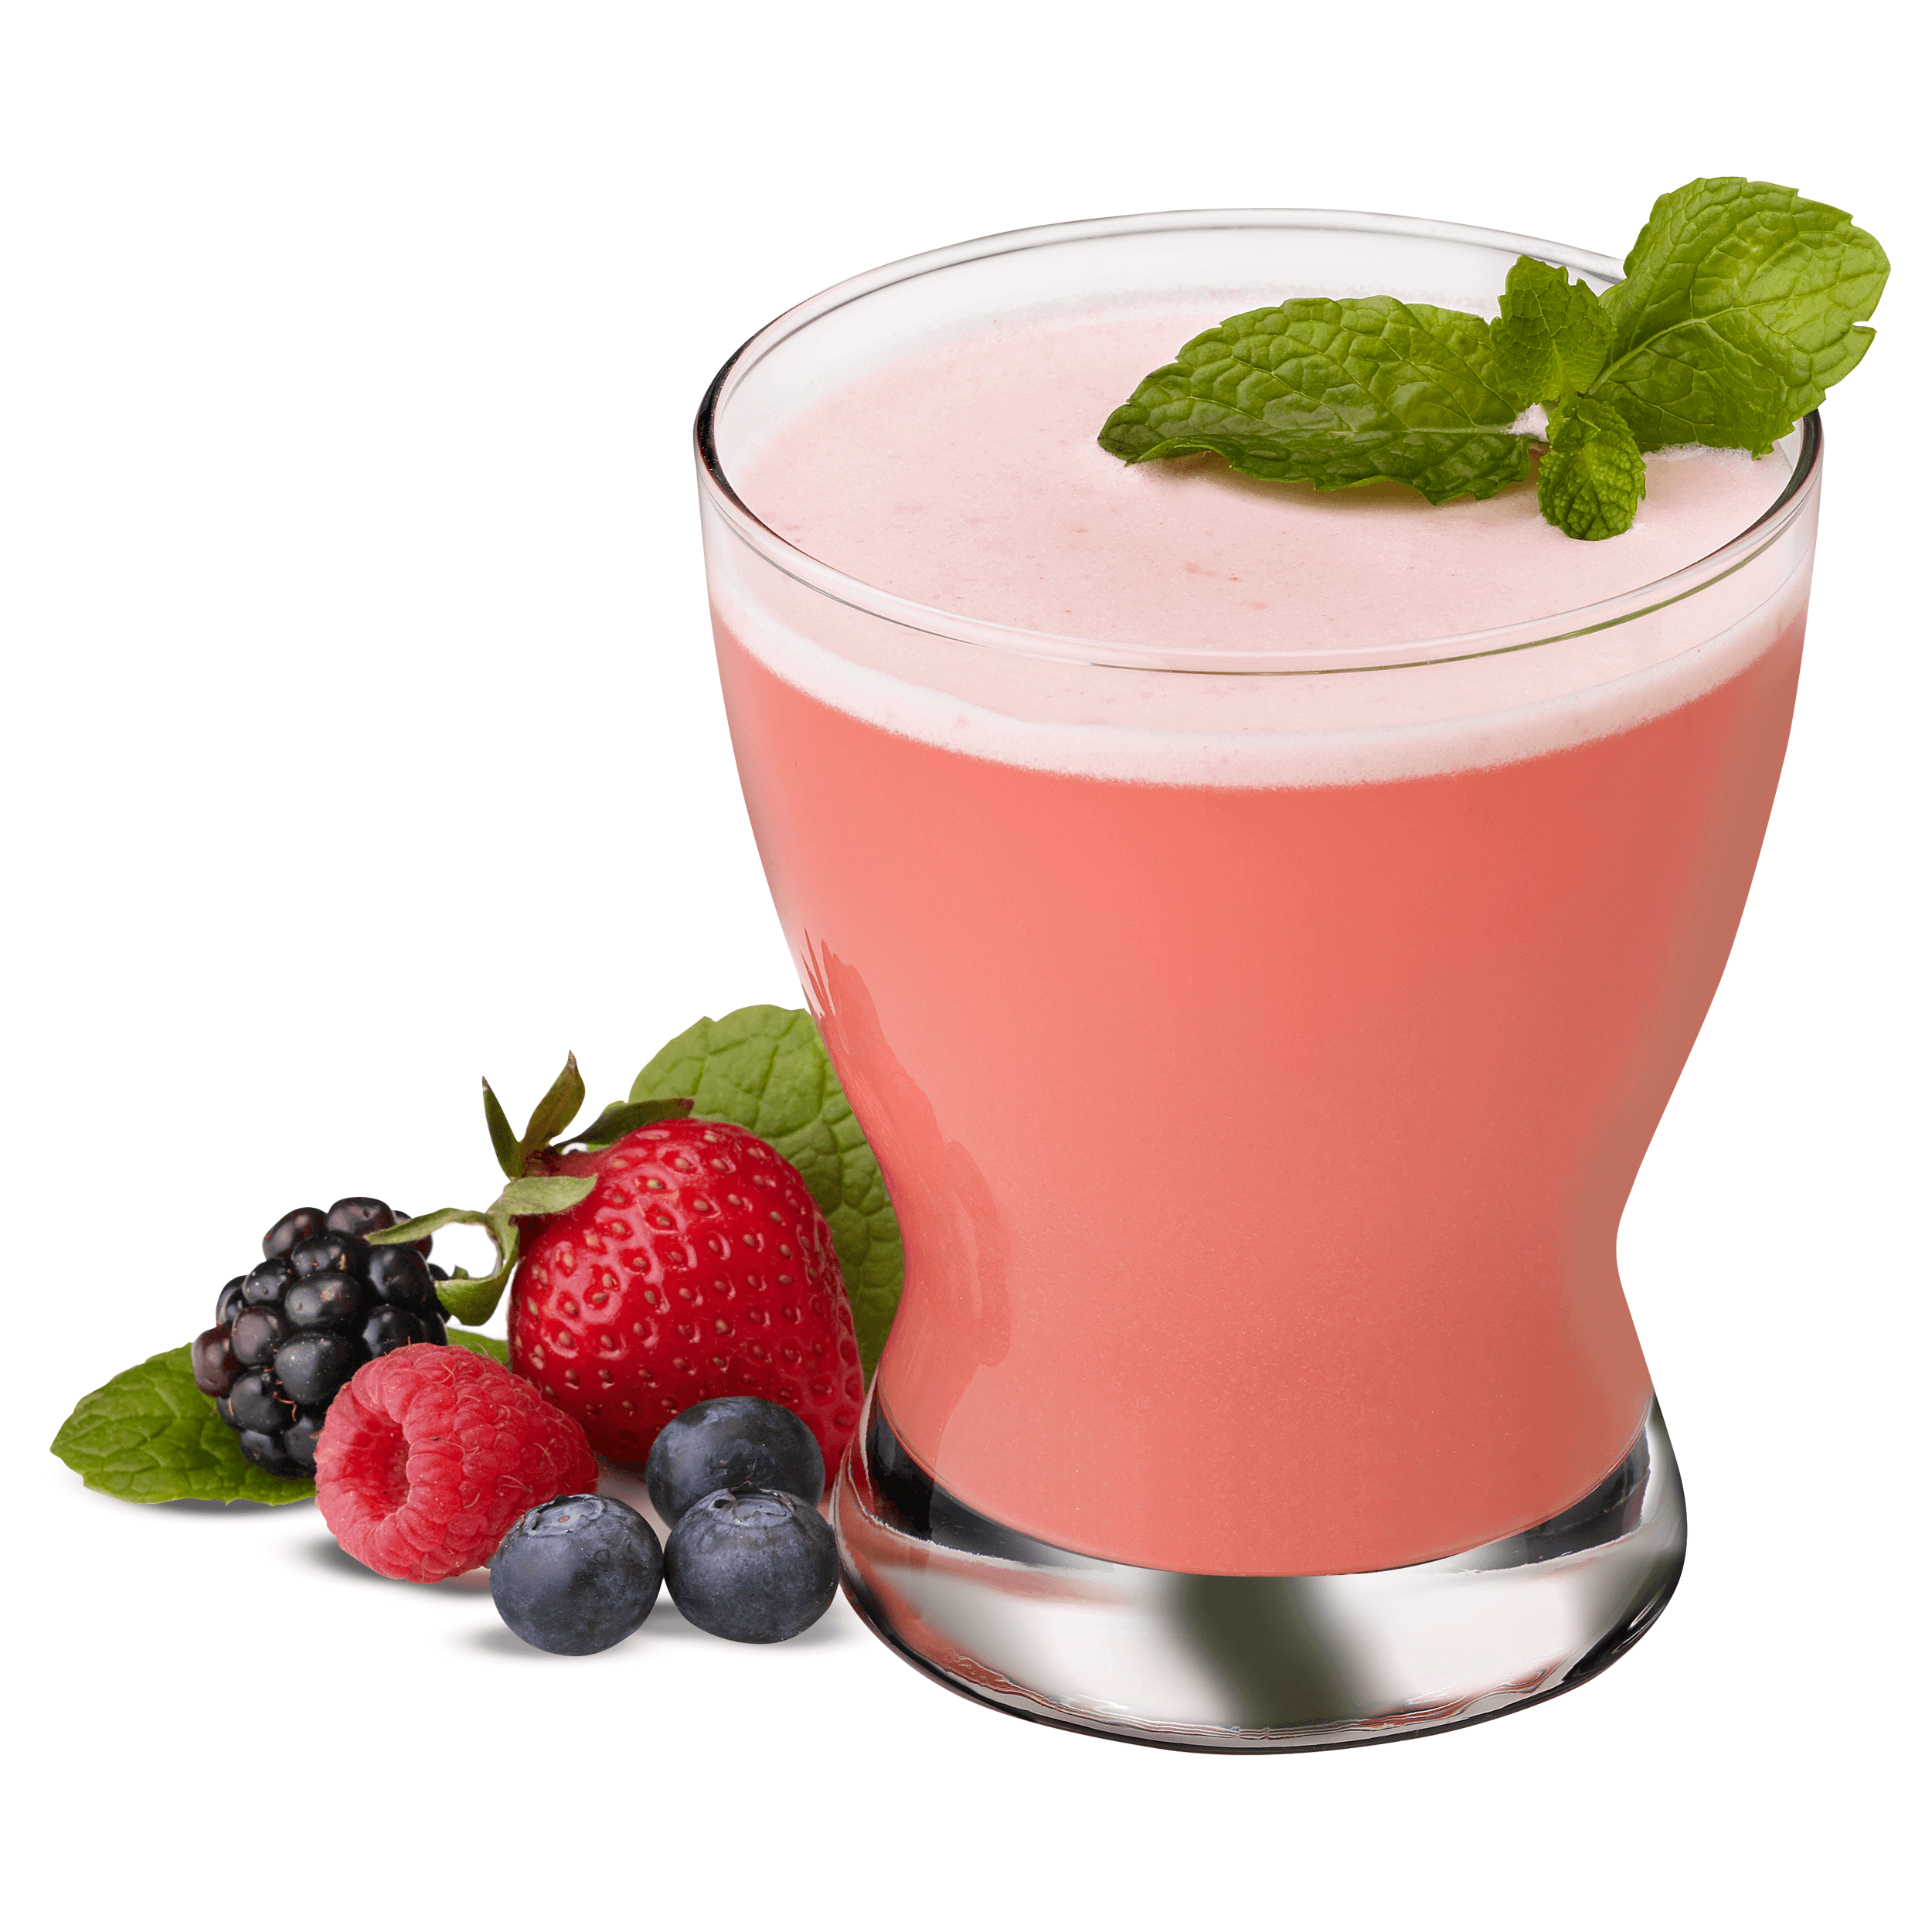 Image of Biocare Semaglutide constipation relief mixed berry beverage in a glass for ozempic side effects